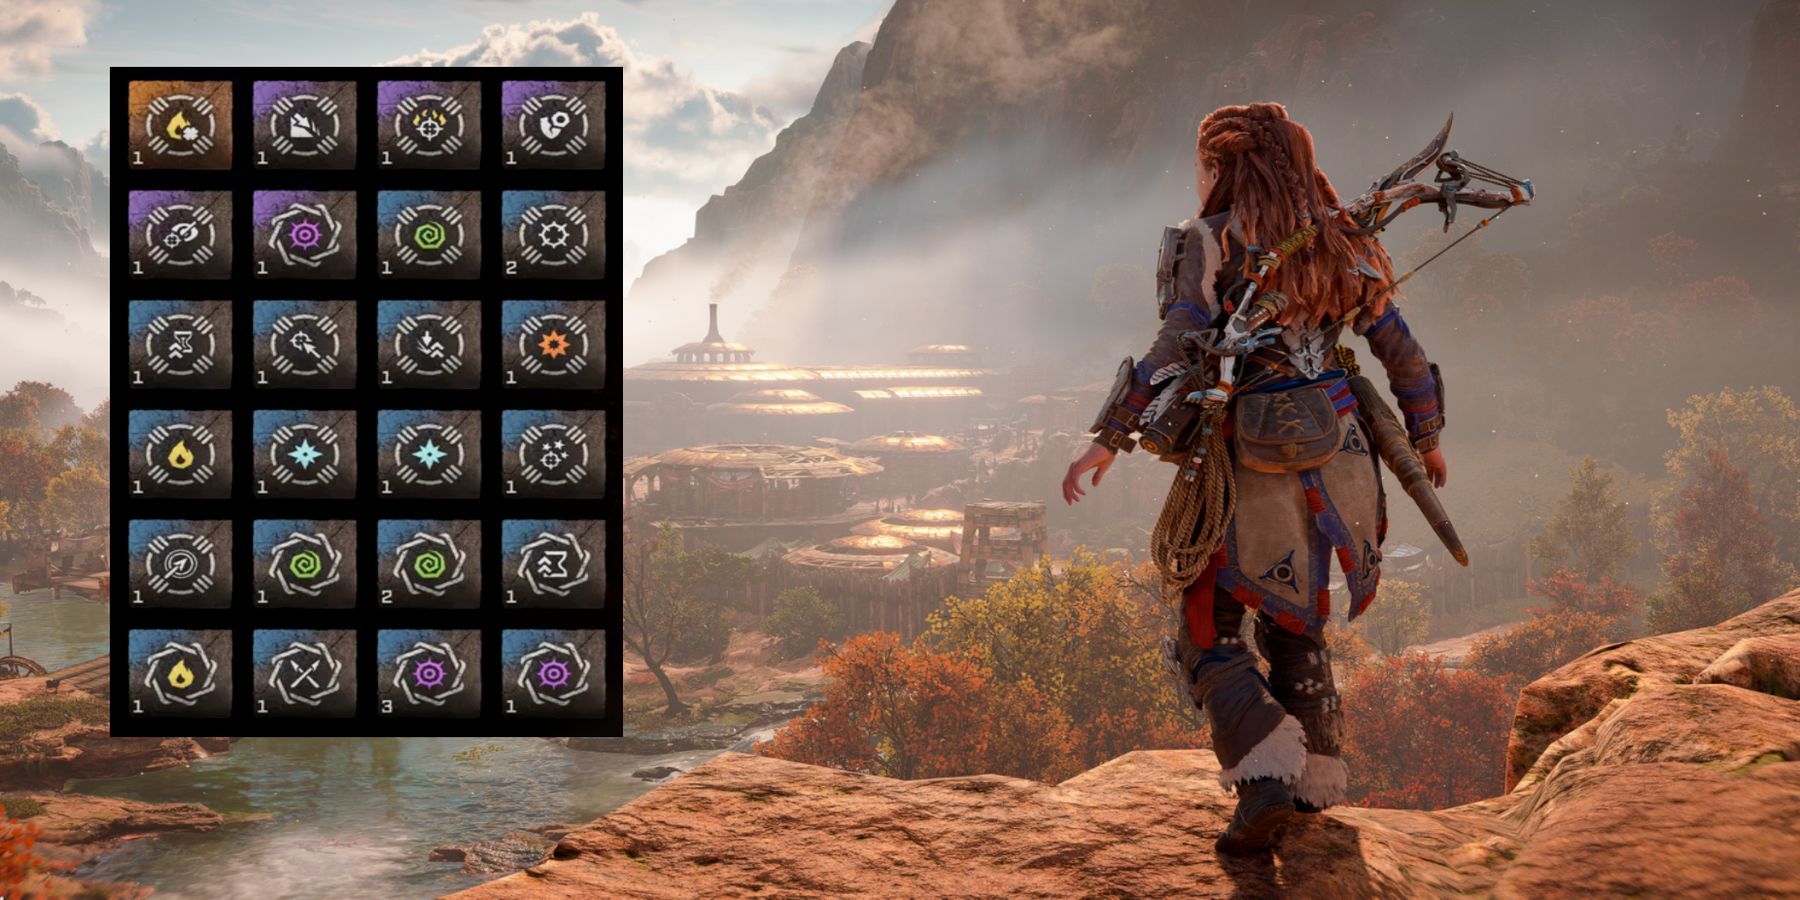 How to coil every legendary weapon in Horizon Forbidden West